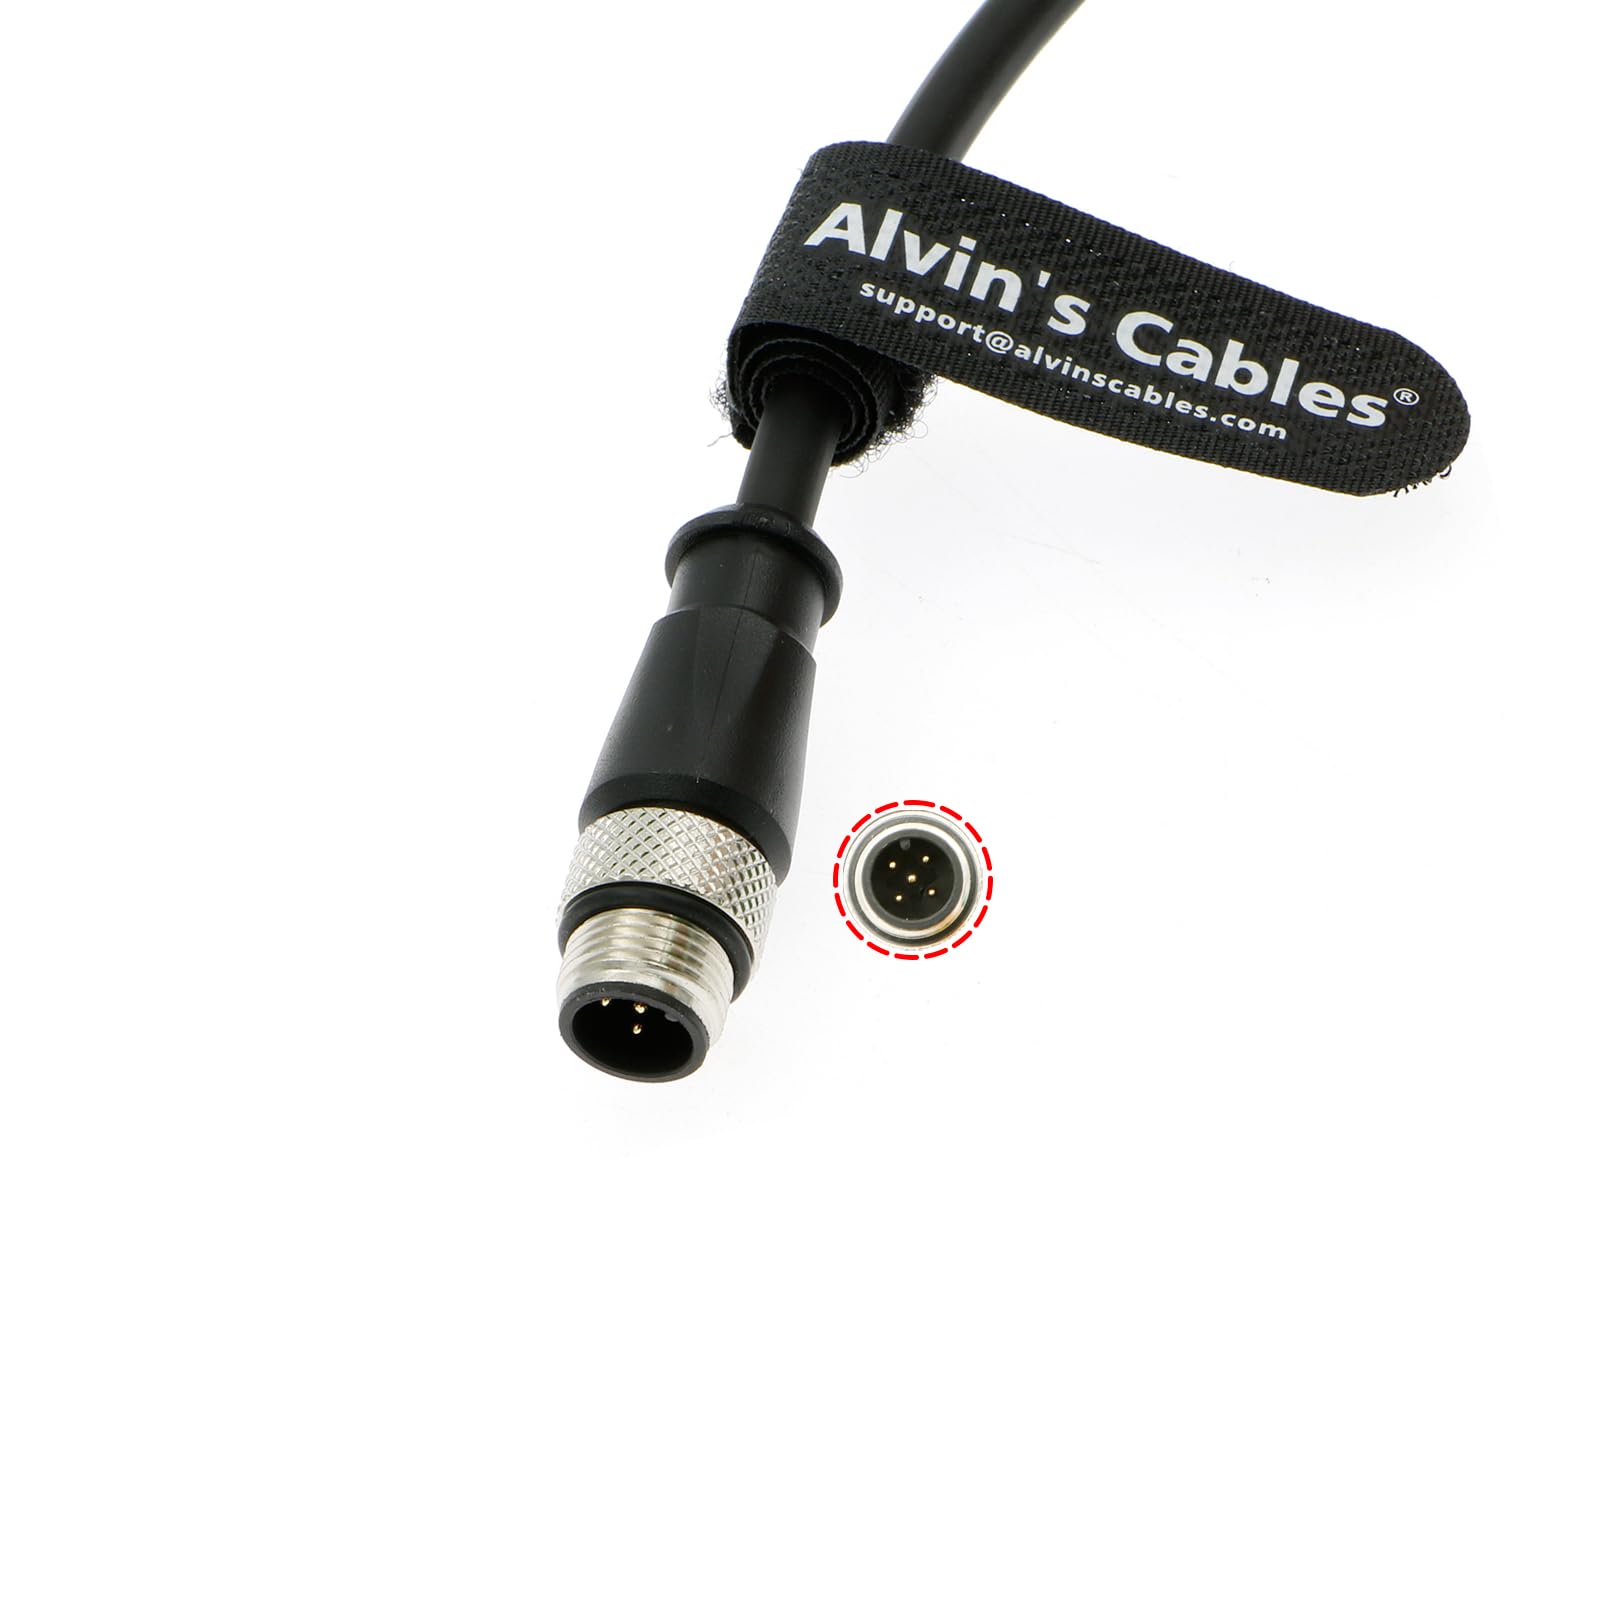 Alvin's Cables M12 A-Code 5 Pin Male to Female Aviation Sensor Connector Industrial Shielded Cable for Sensor Devices| Network 2M/6.5Ft